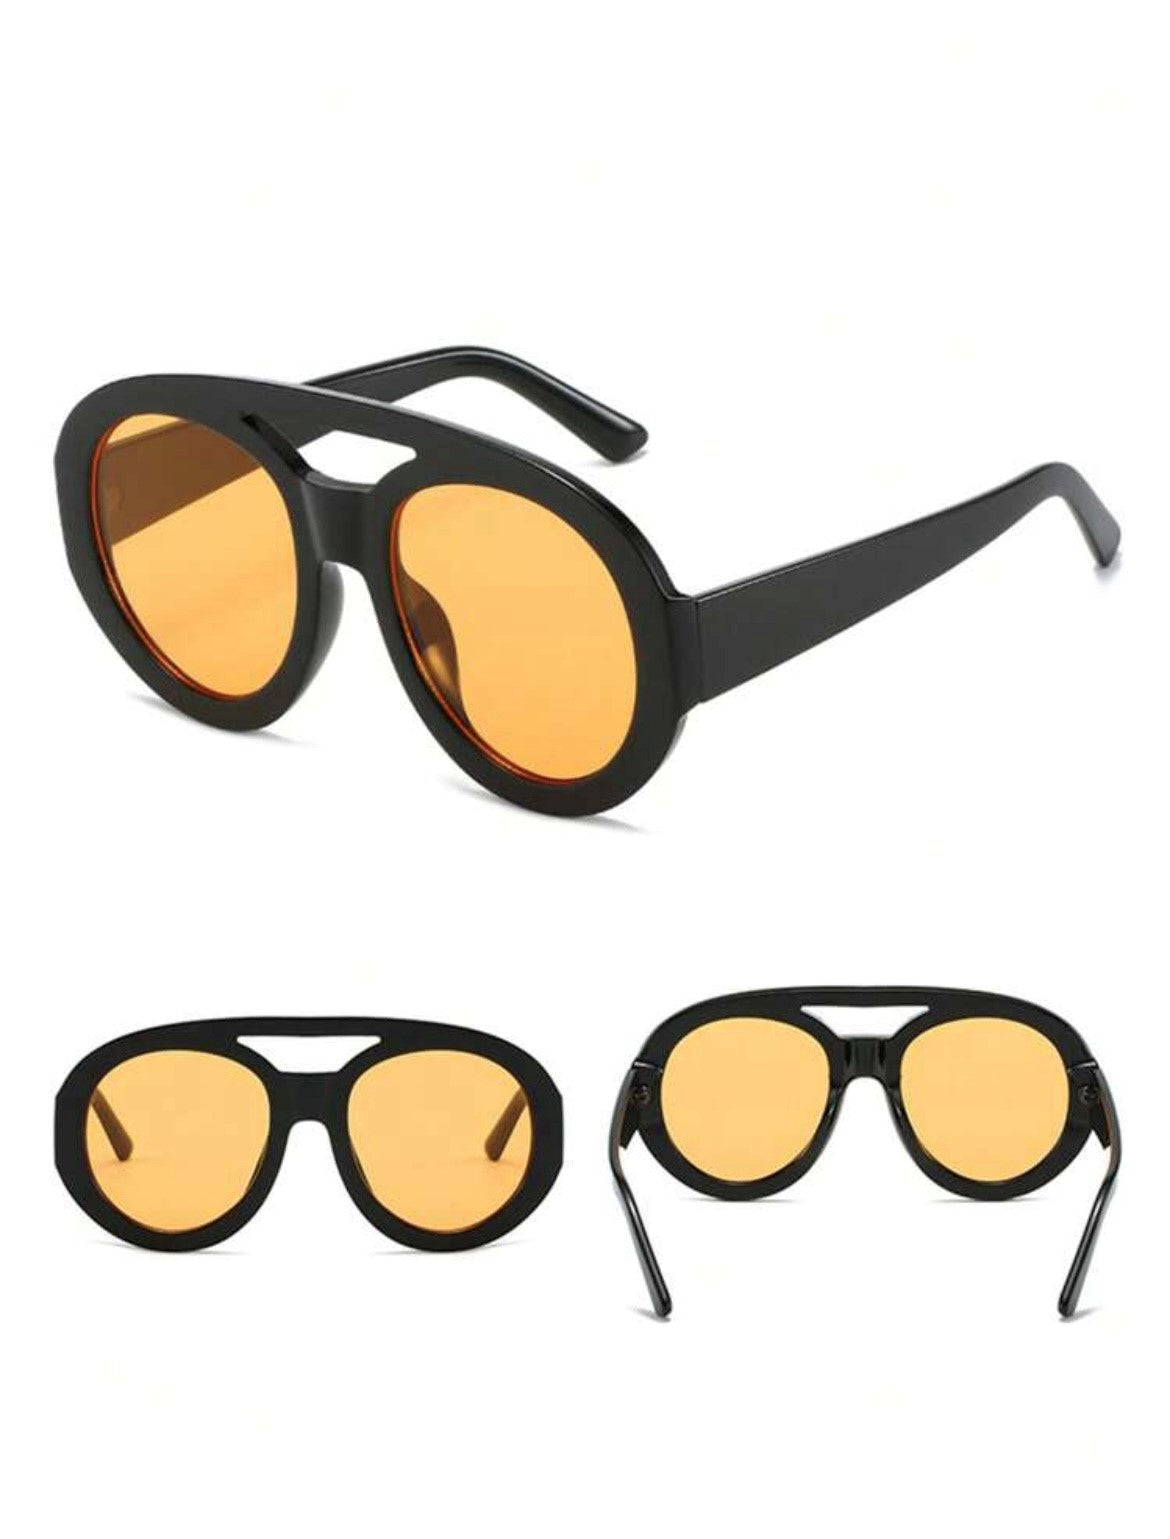 Top Class Round Frame Shades